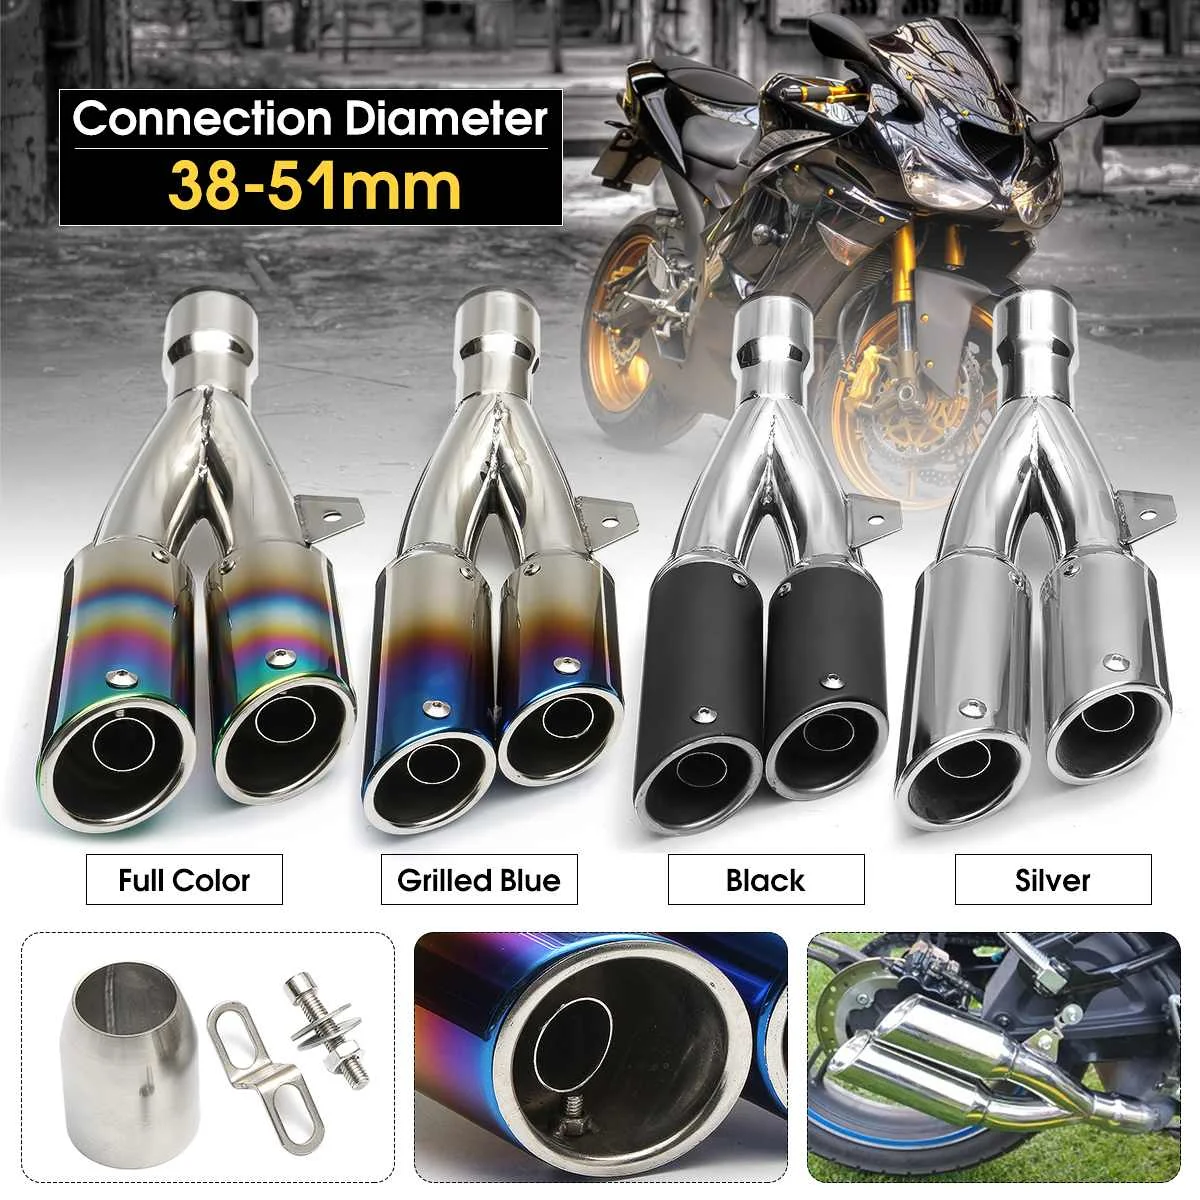 Dual outlet exhaust Motorcycle Scooter Stainless Steel Exhaust Muffler